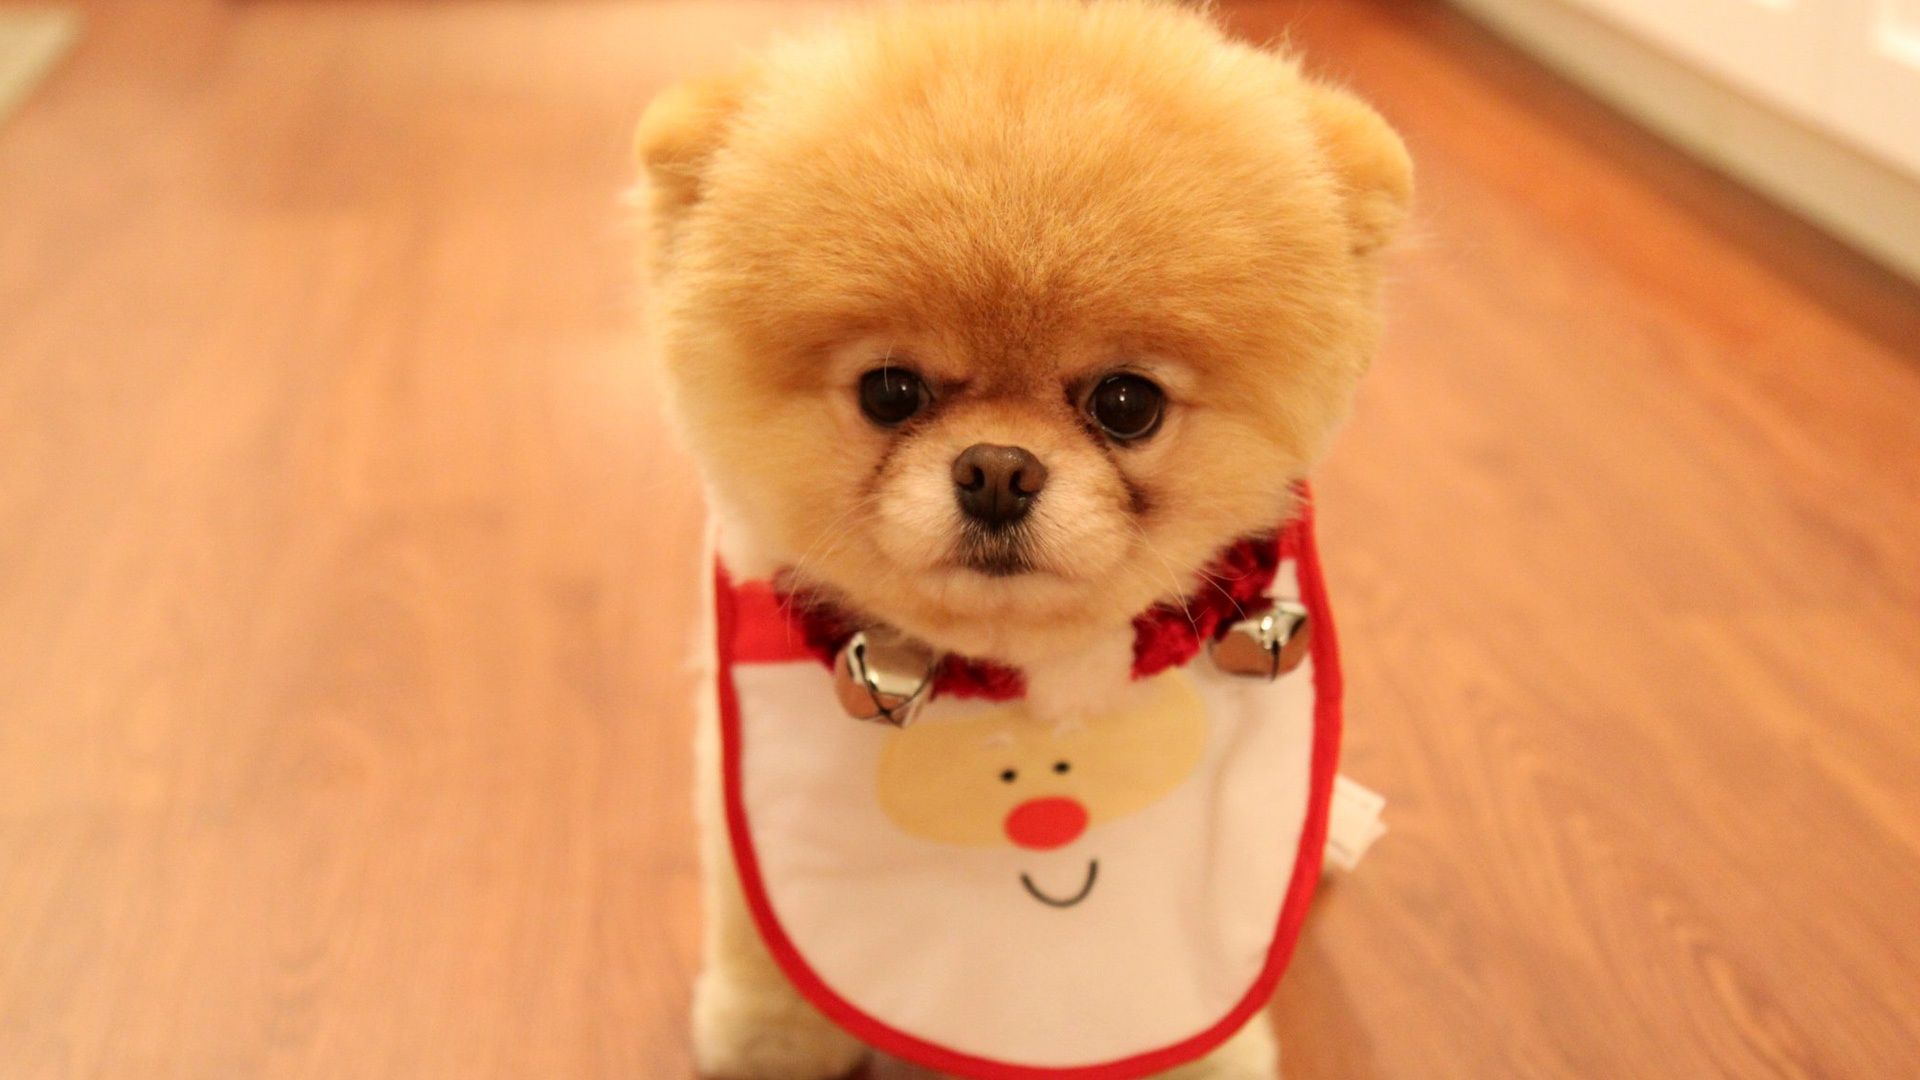 Free download Boo The Worlds Cutest Dog wallpaper 790027